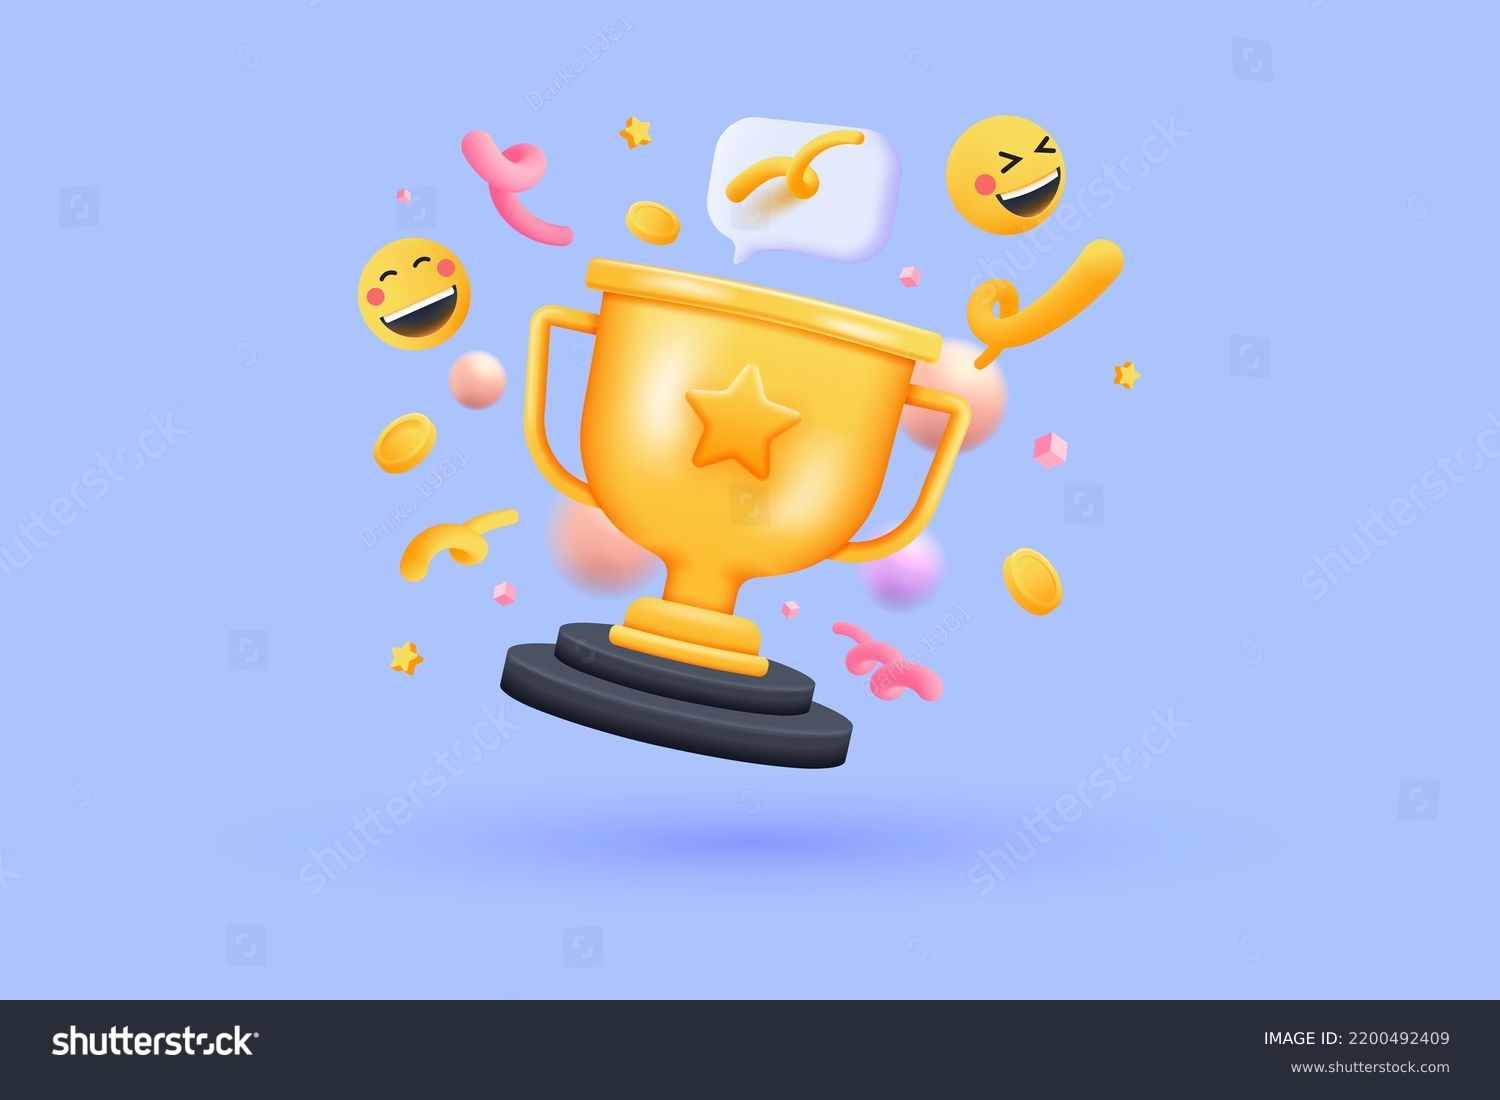 SVG of 3D Trophy cup with floating chat box, emoji, ribbon and geometric shapes on purple background. Celebration, winner, champion and reward concept. 3d vector illustration svg